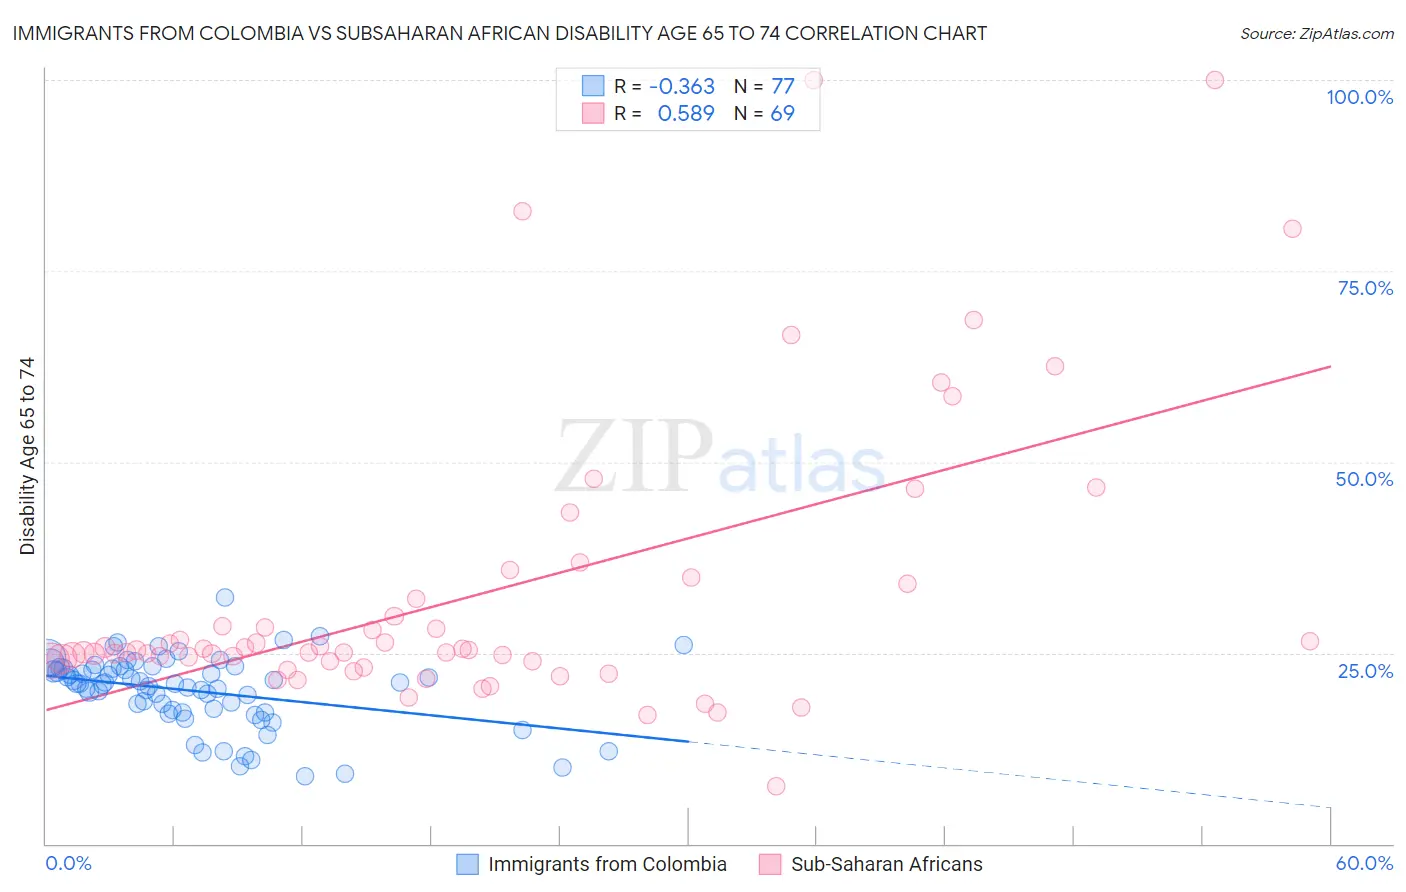 Immigrants from Colombia vs Subsaharan African Disability Age 65 to 74